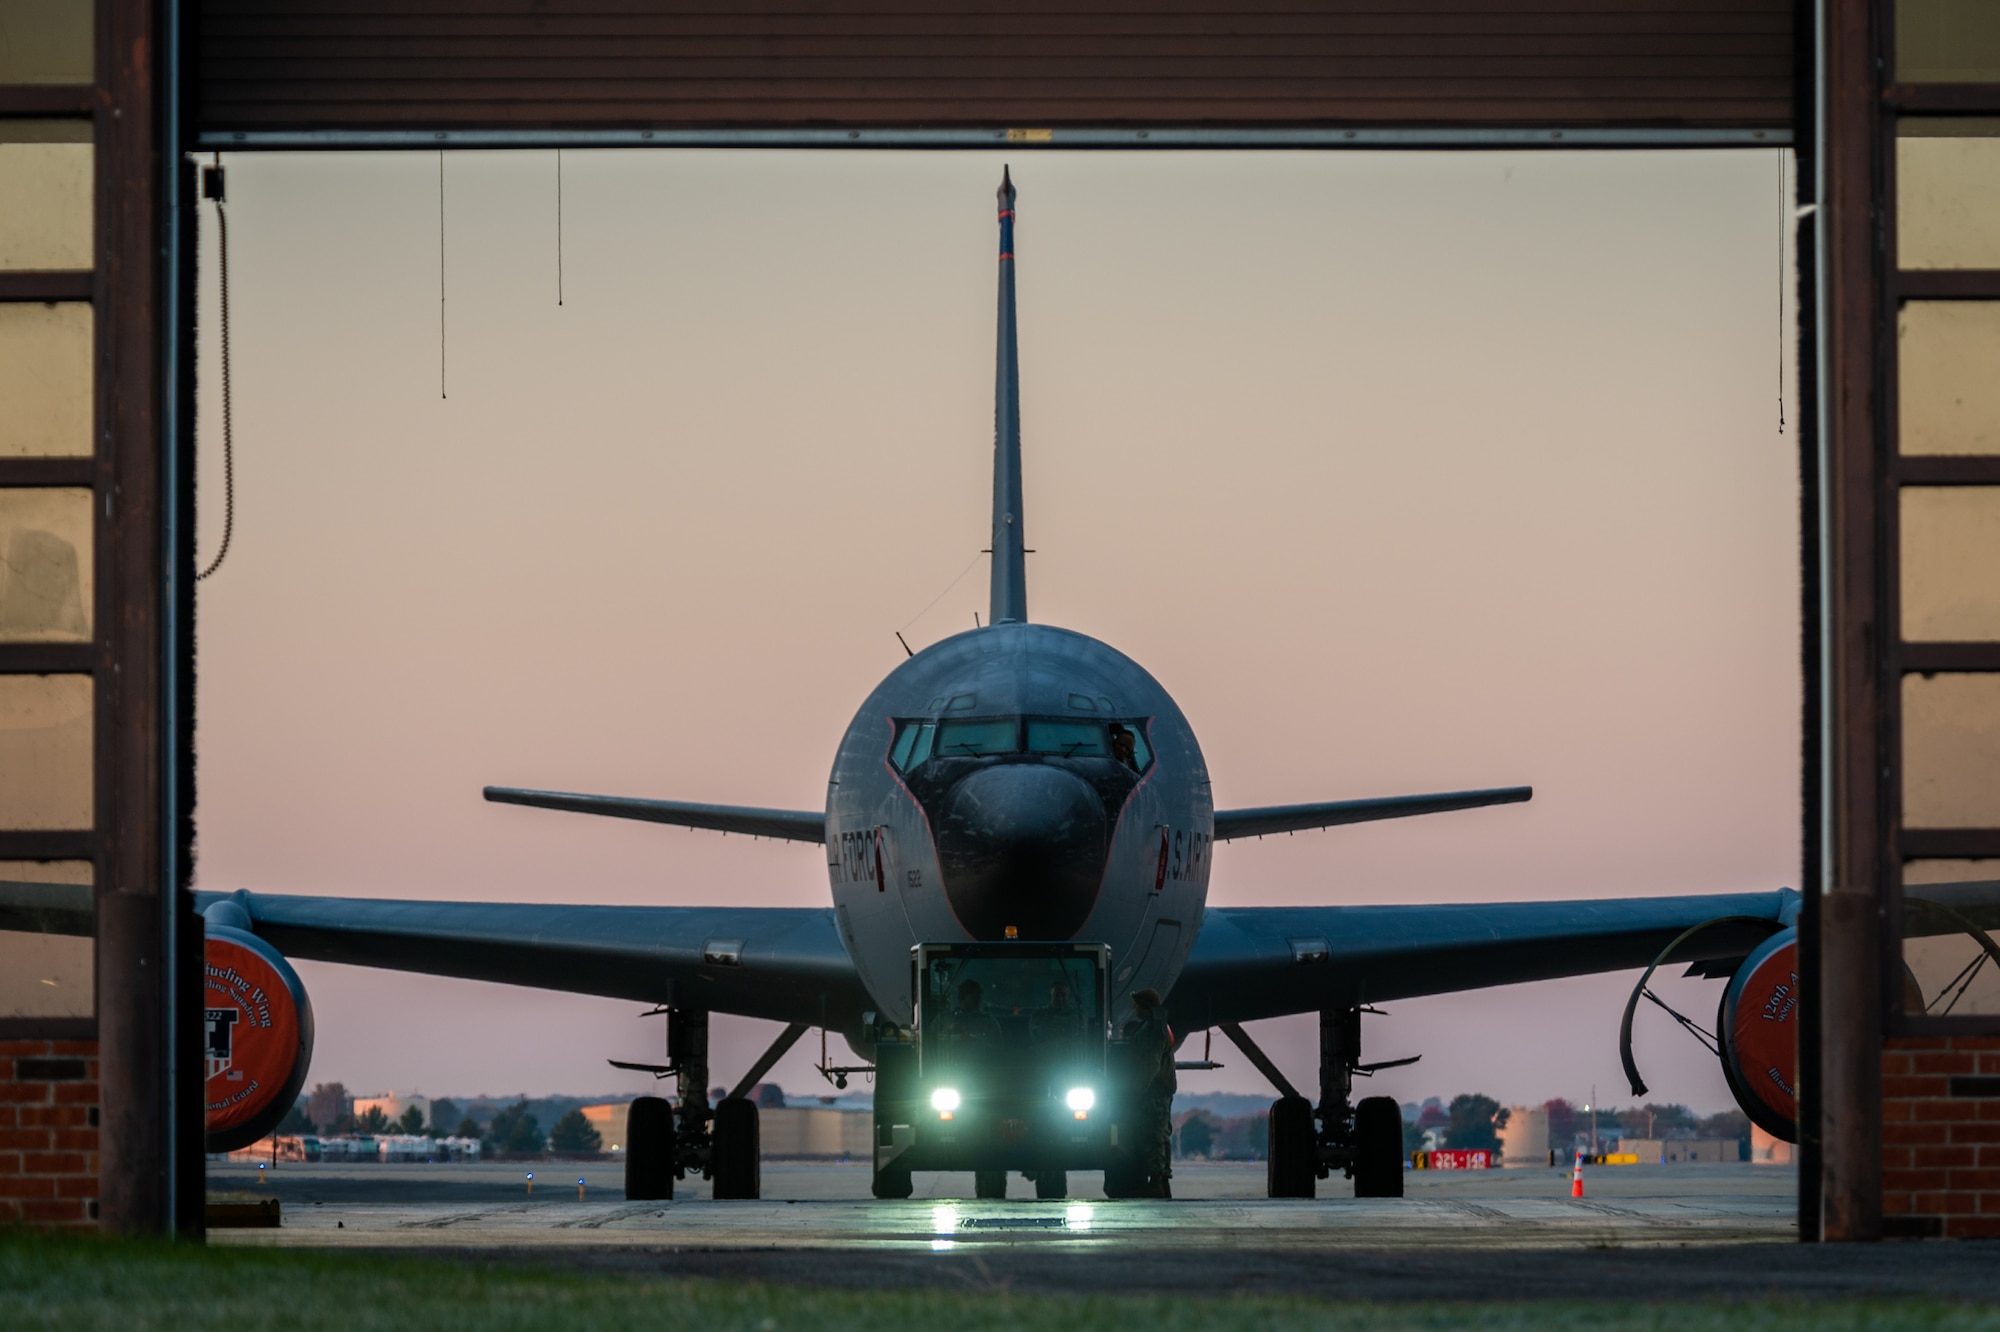 KC-135 tanker plane being pulled into a hanger.